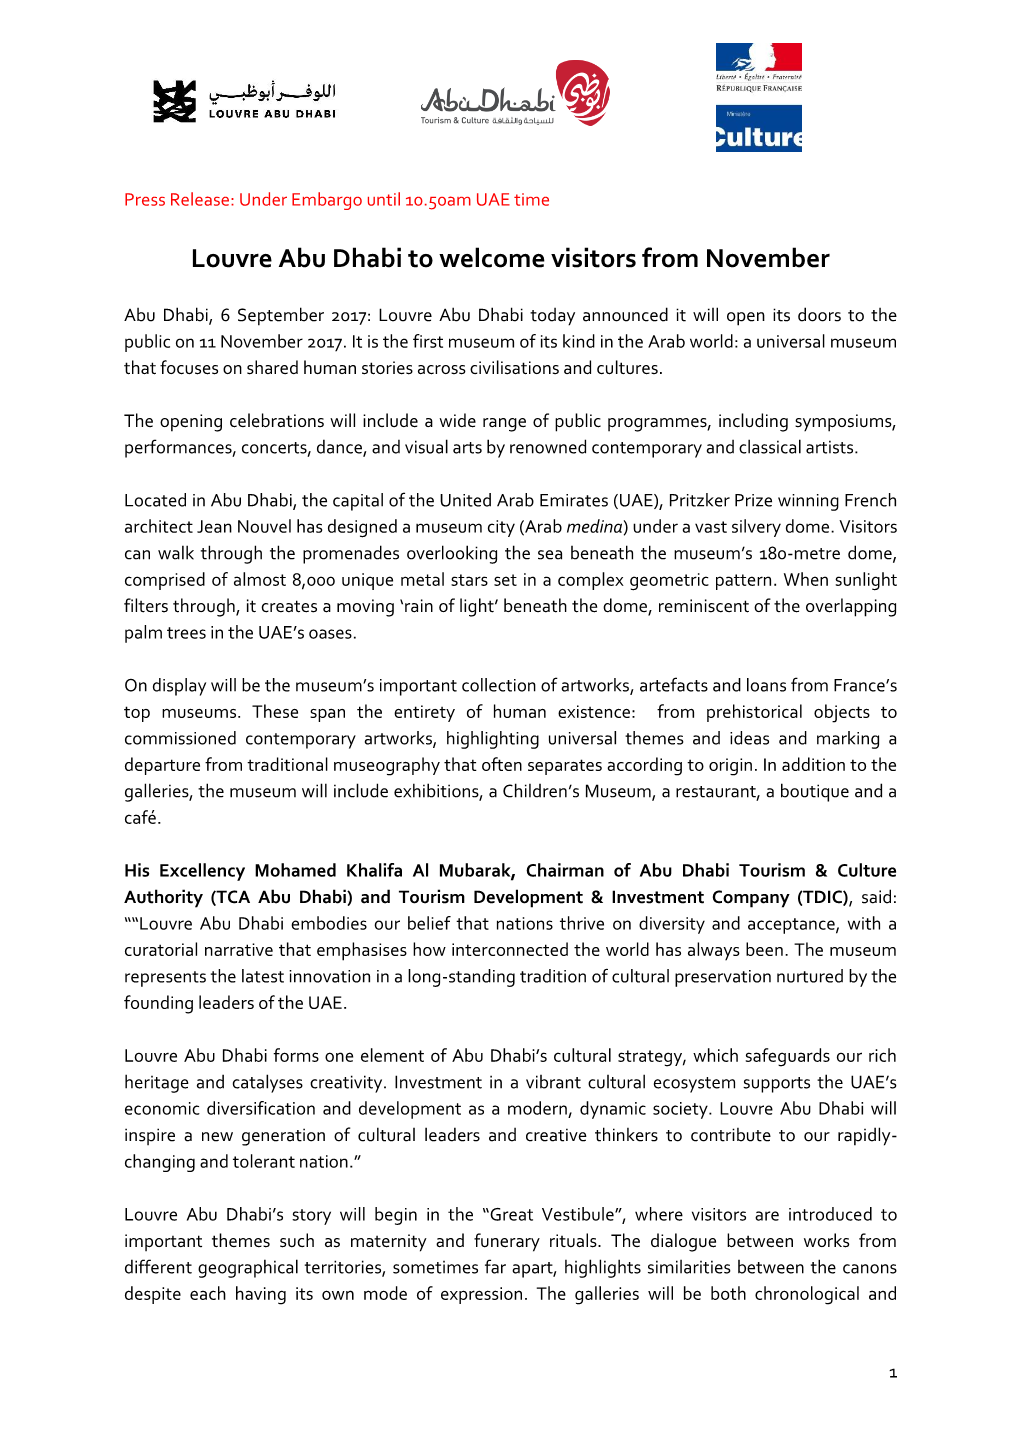 Louvre Abu Dhabi to Welcome Visitors from November